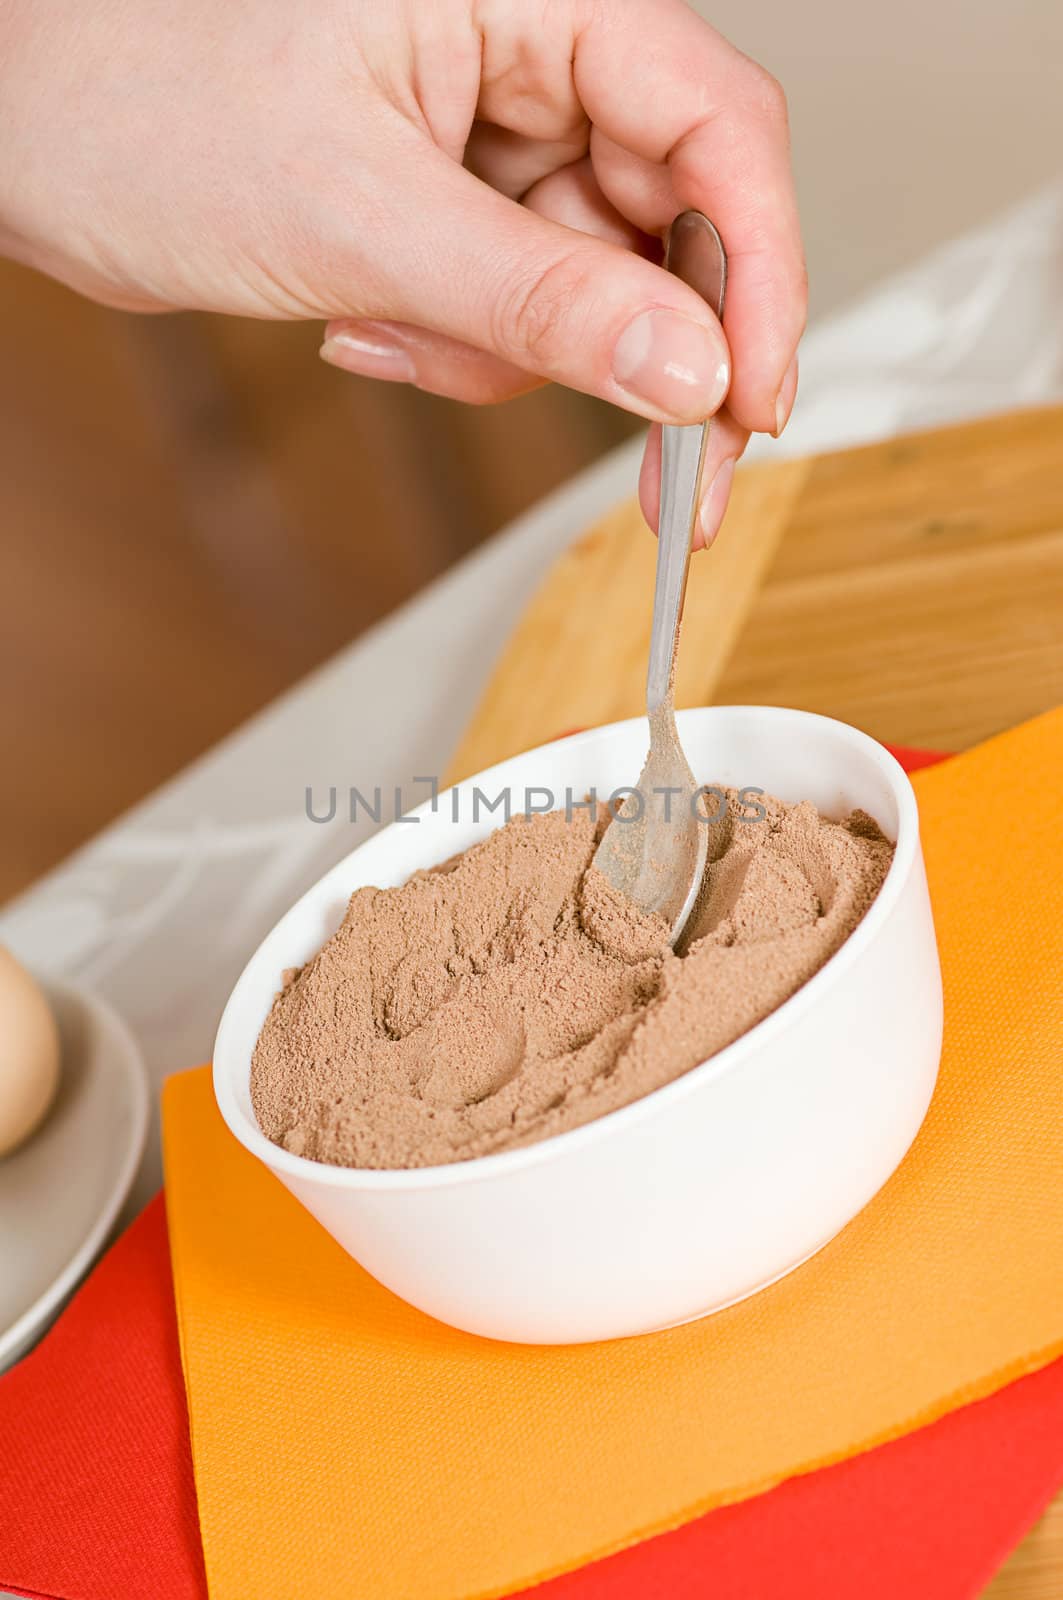 Preparation of dessert from cacao and other ingredients